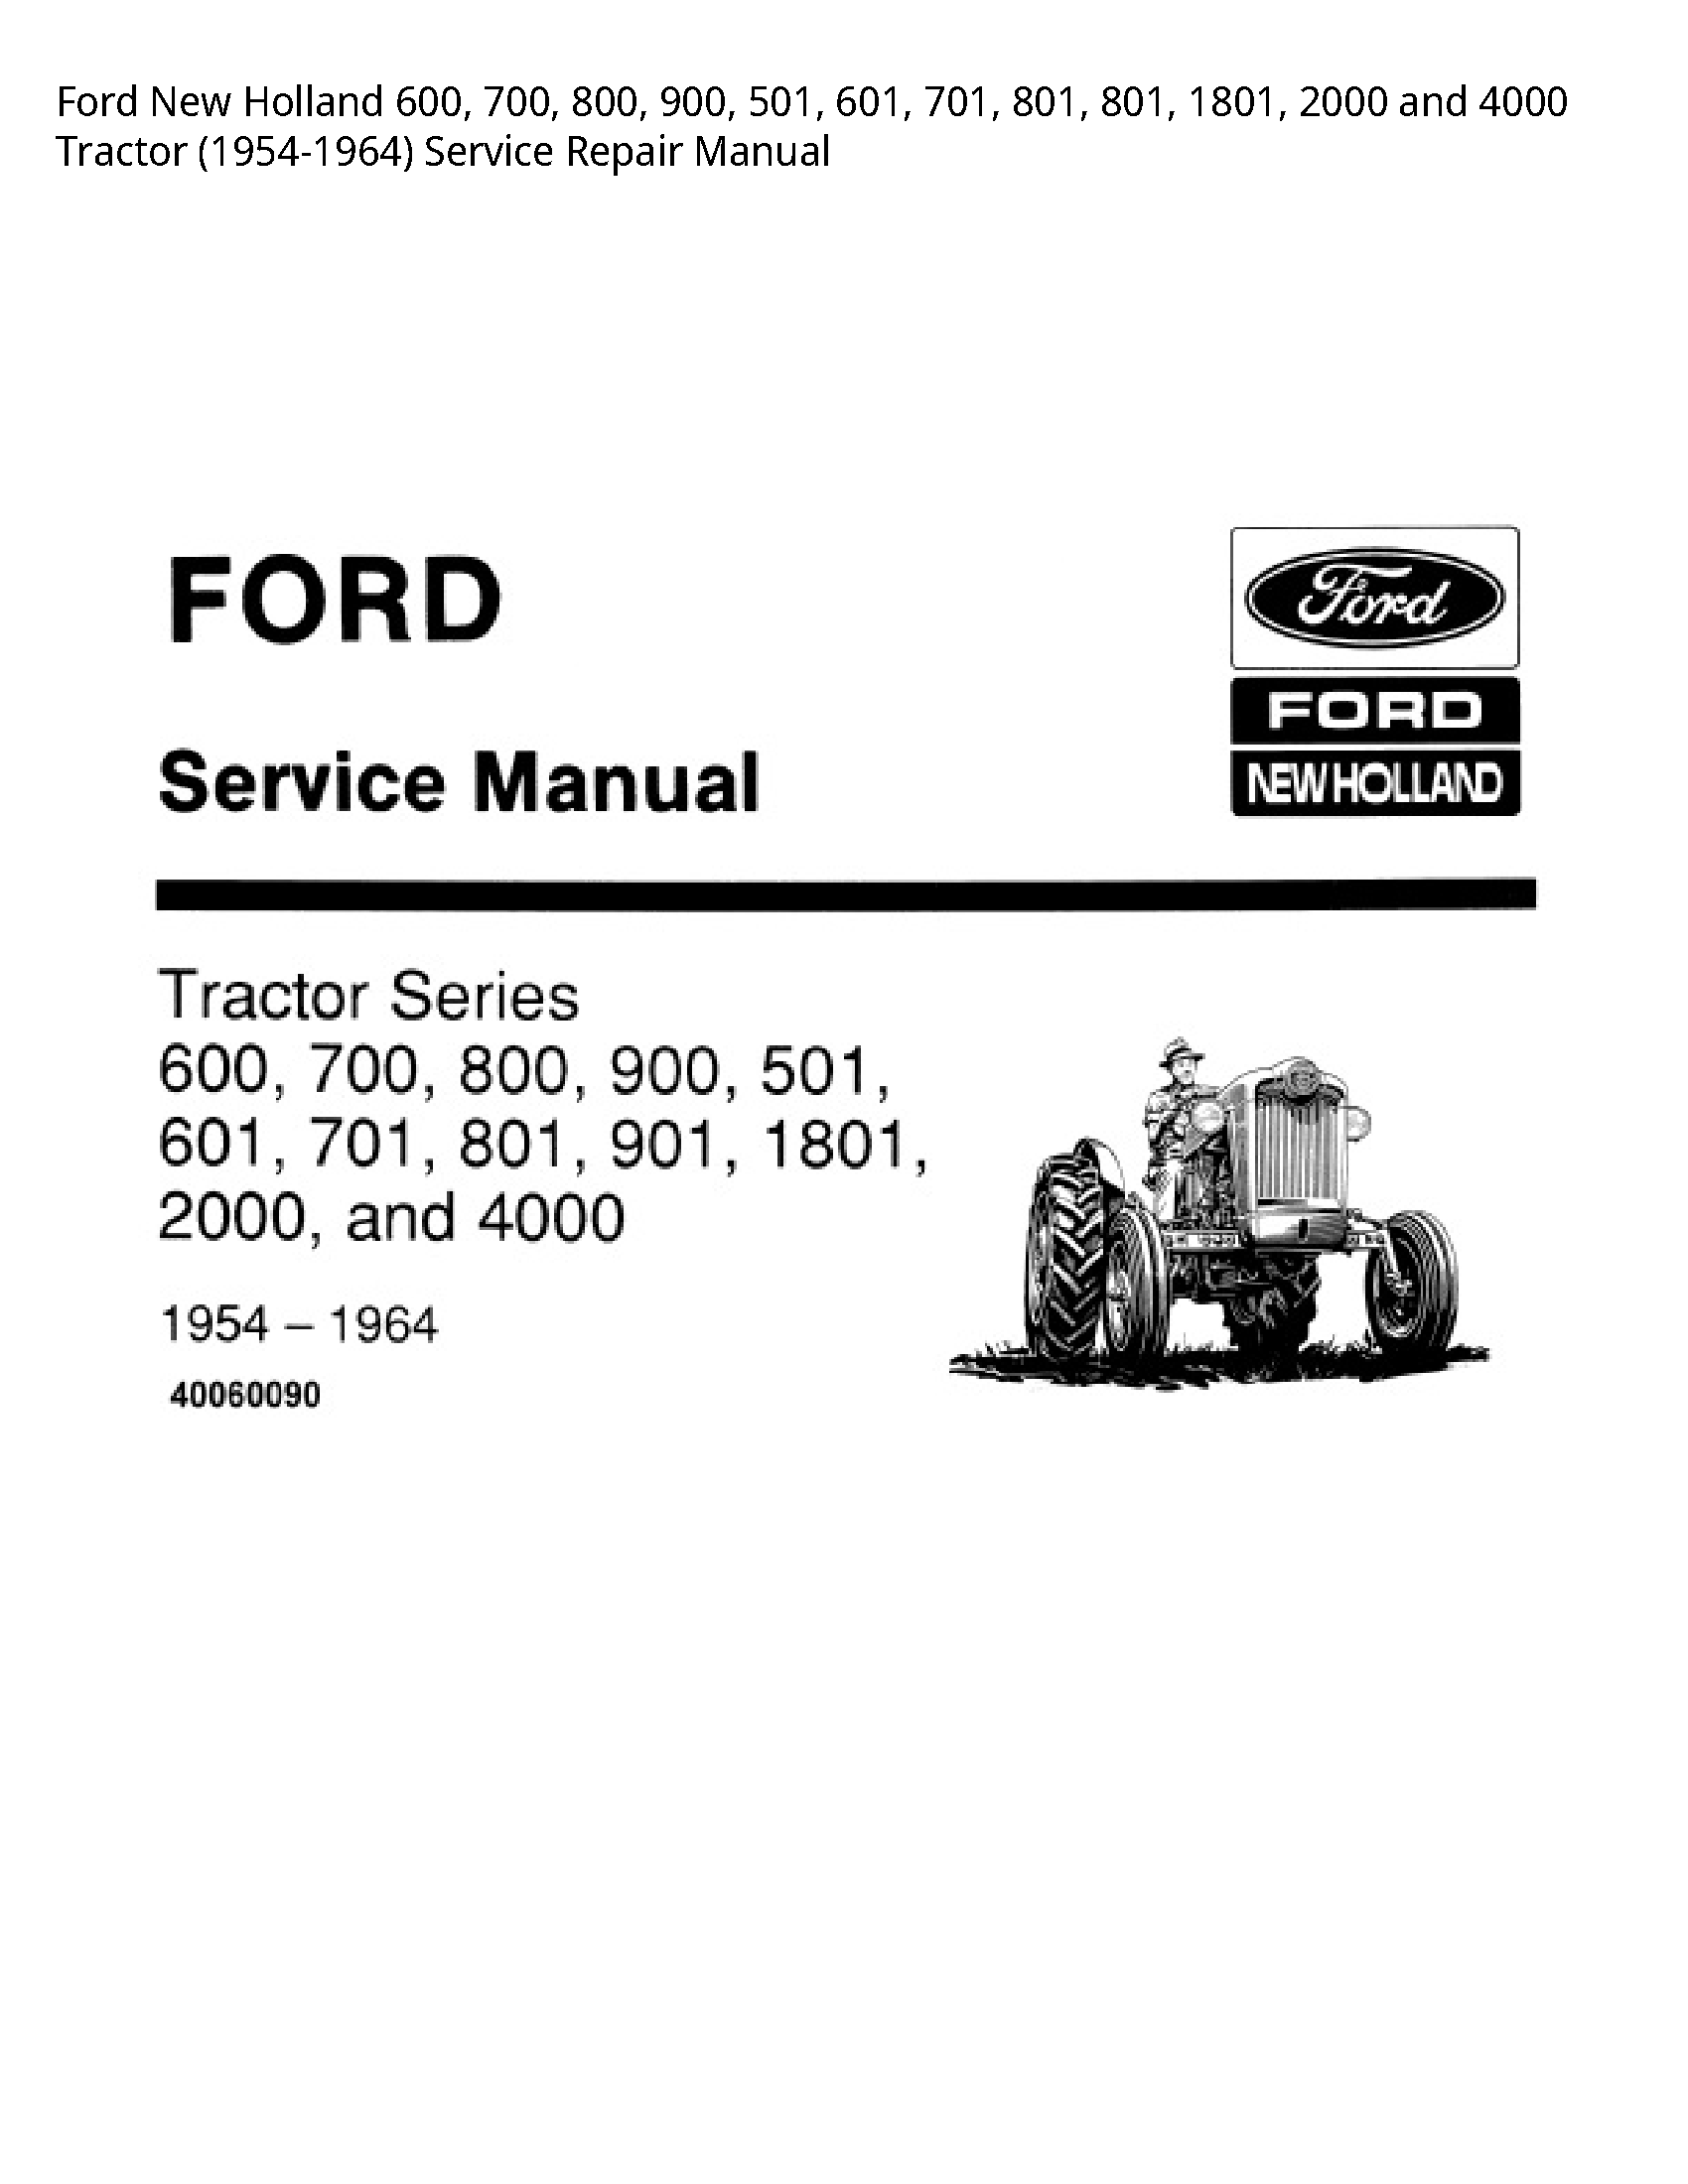  600  Tractor manual